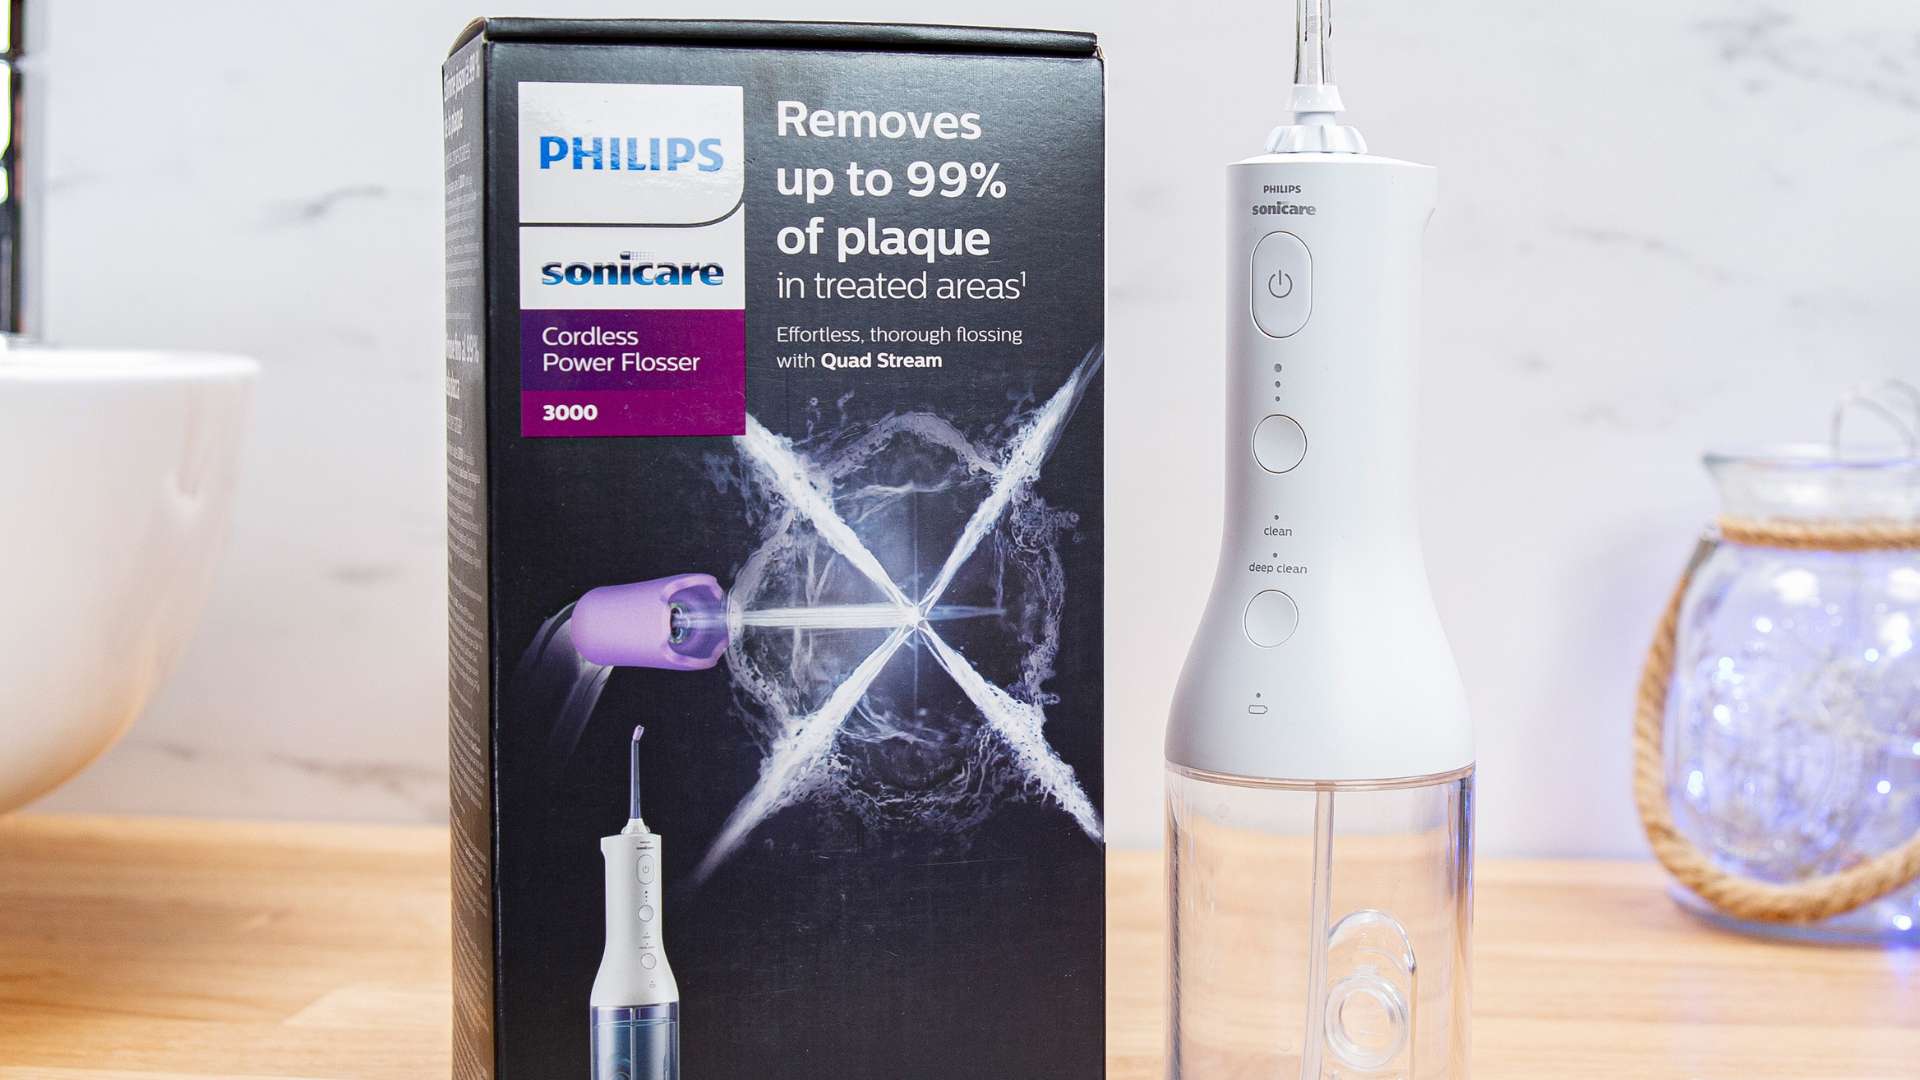 Philips Sonicare Cordless Power Flosser 3000 review 1